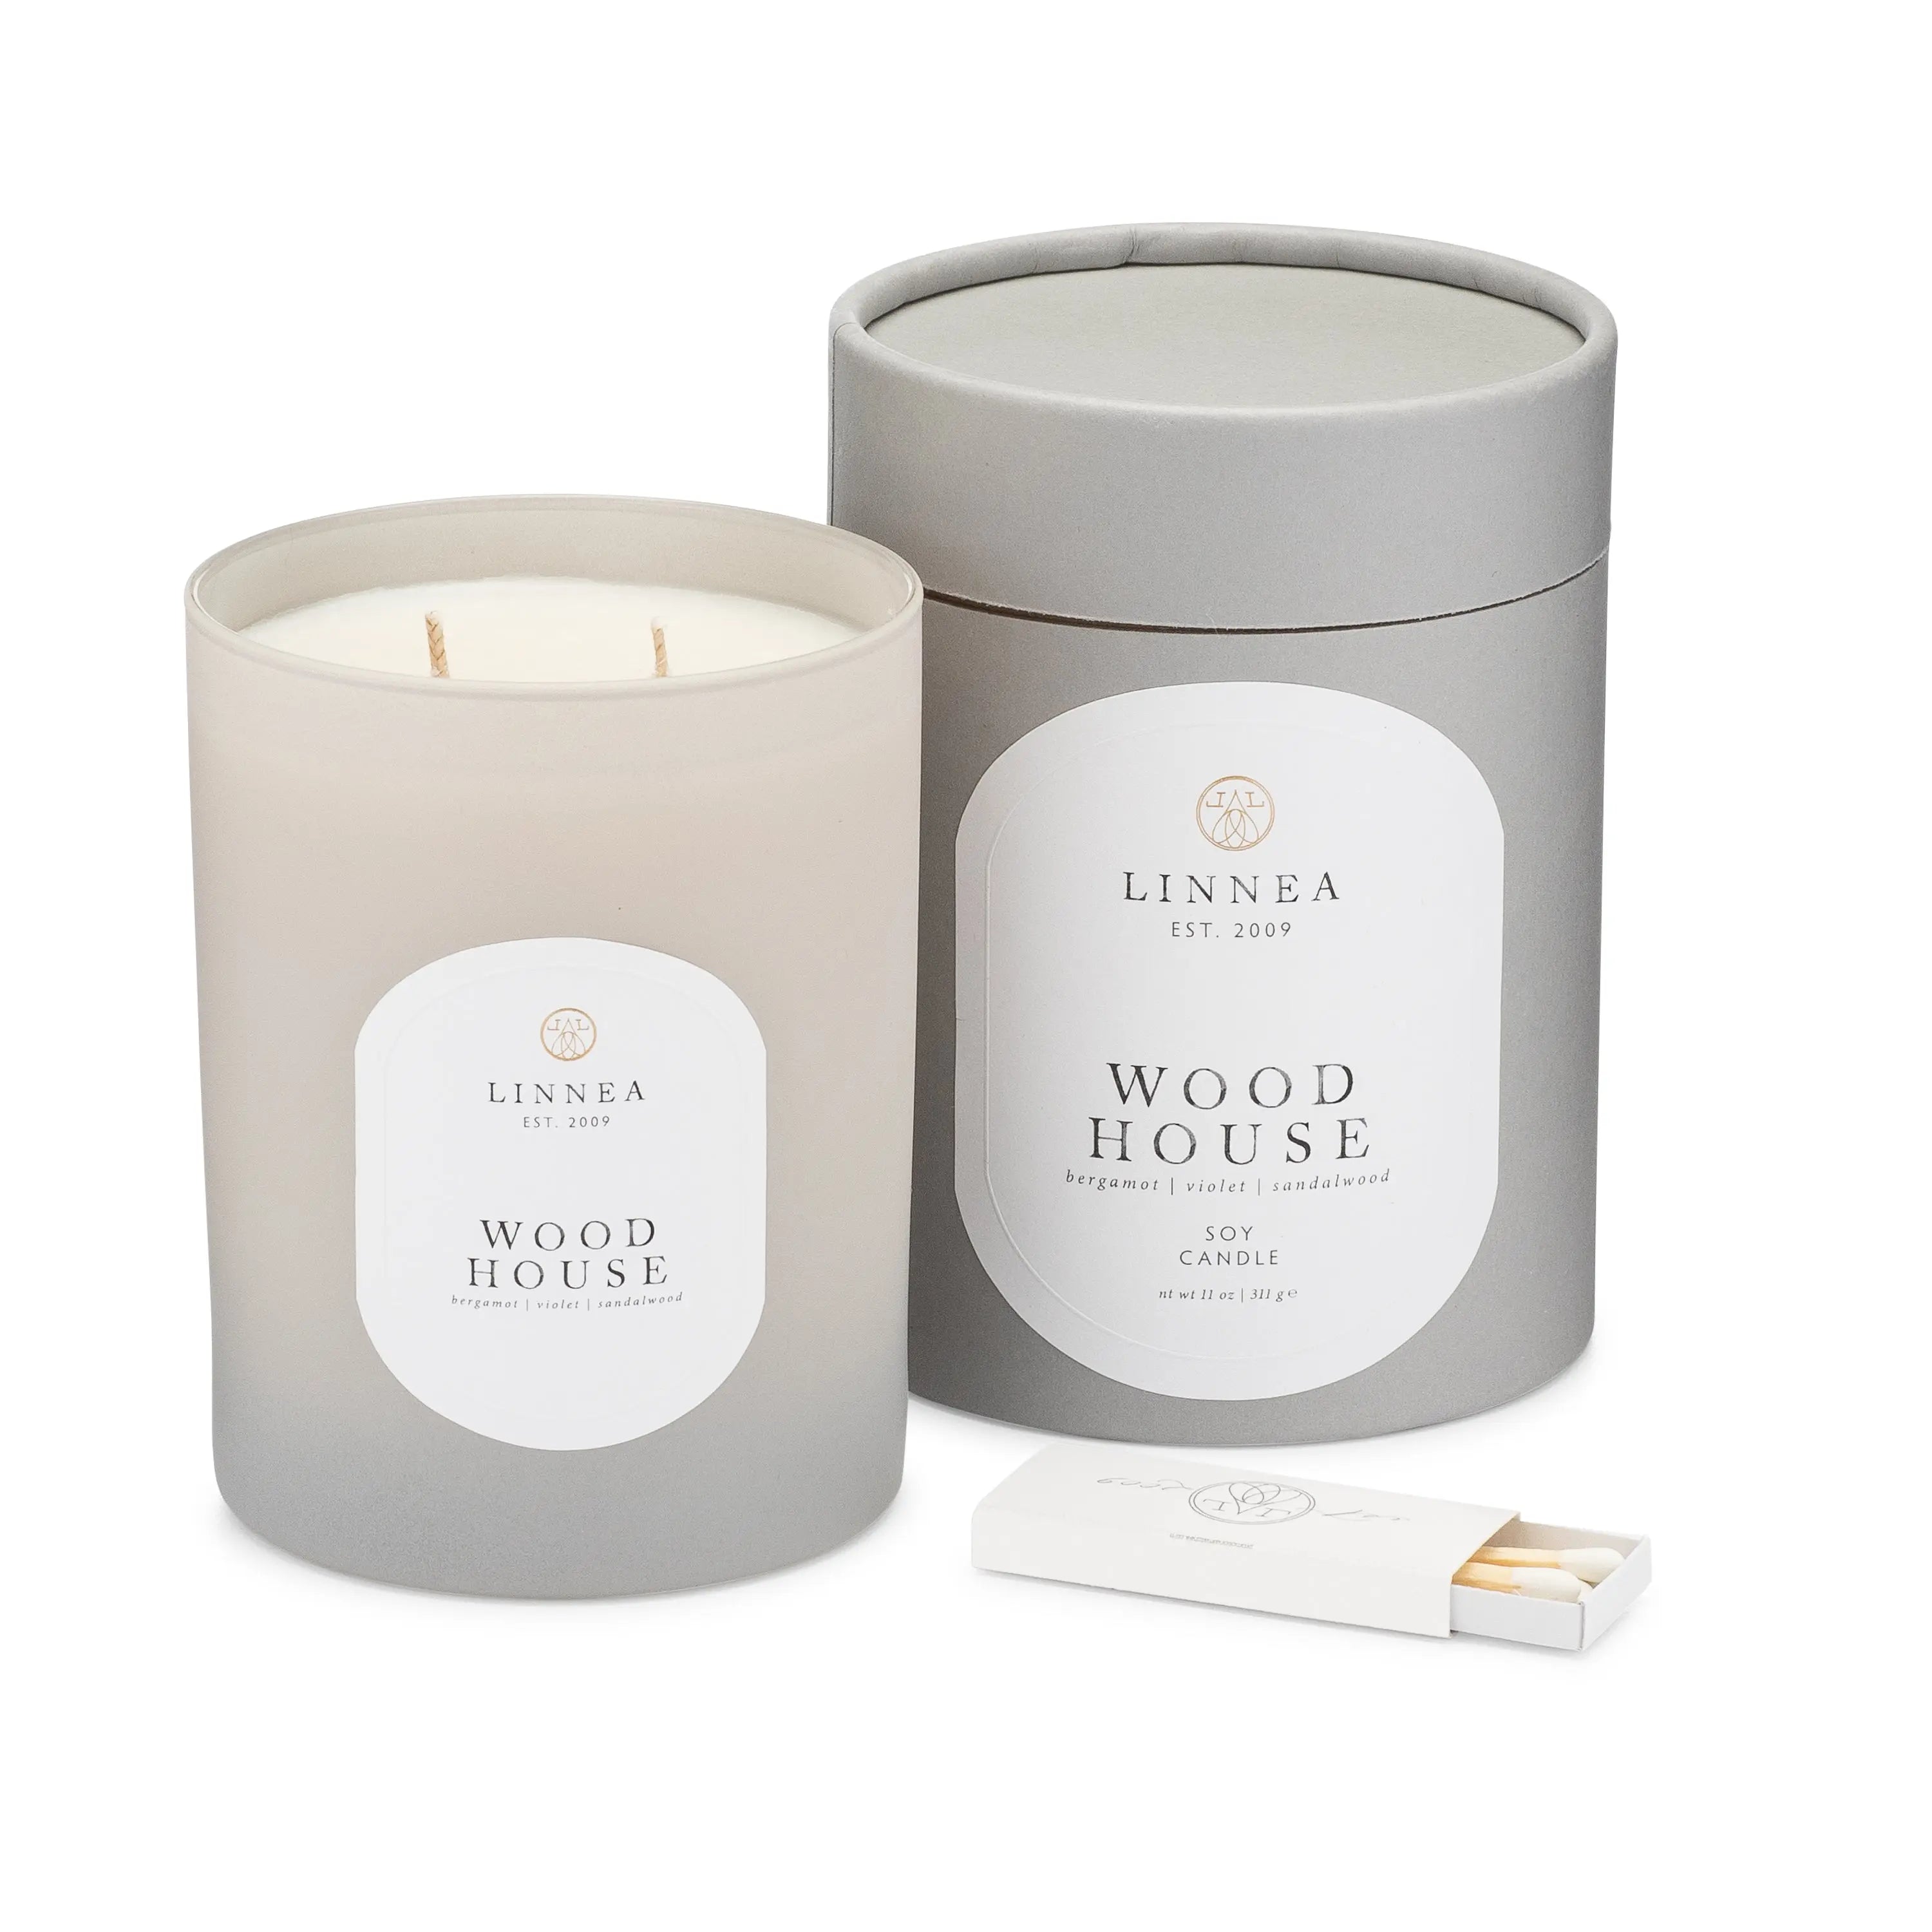 LINNEA Scented Candle in Wood House - Home Smith